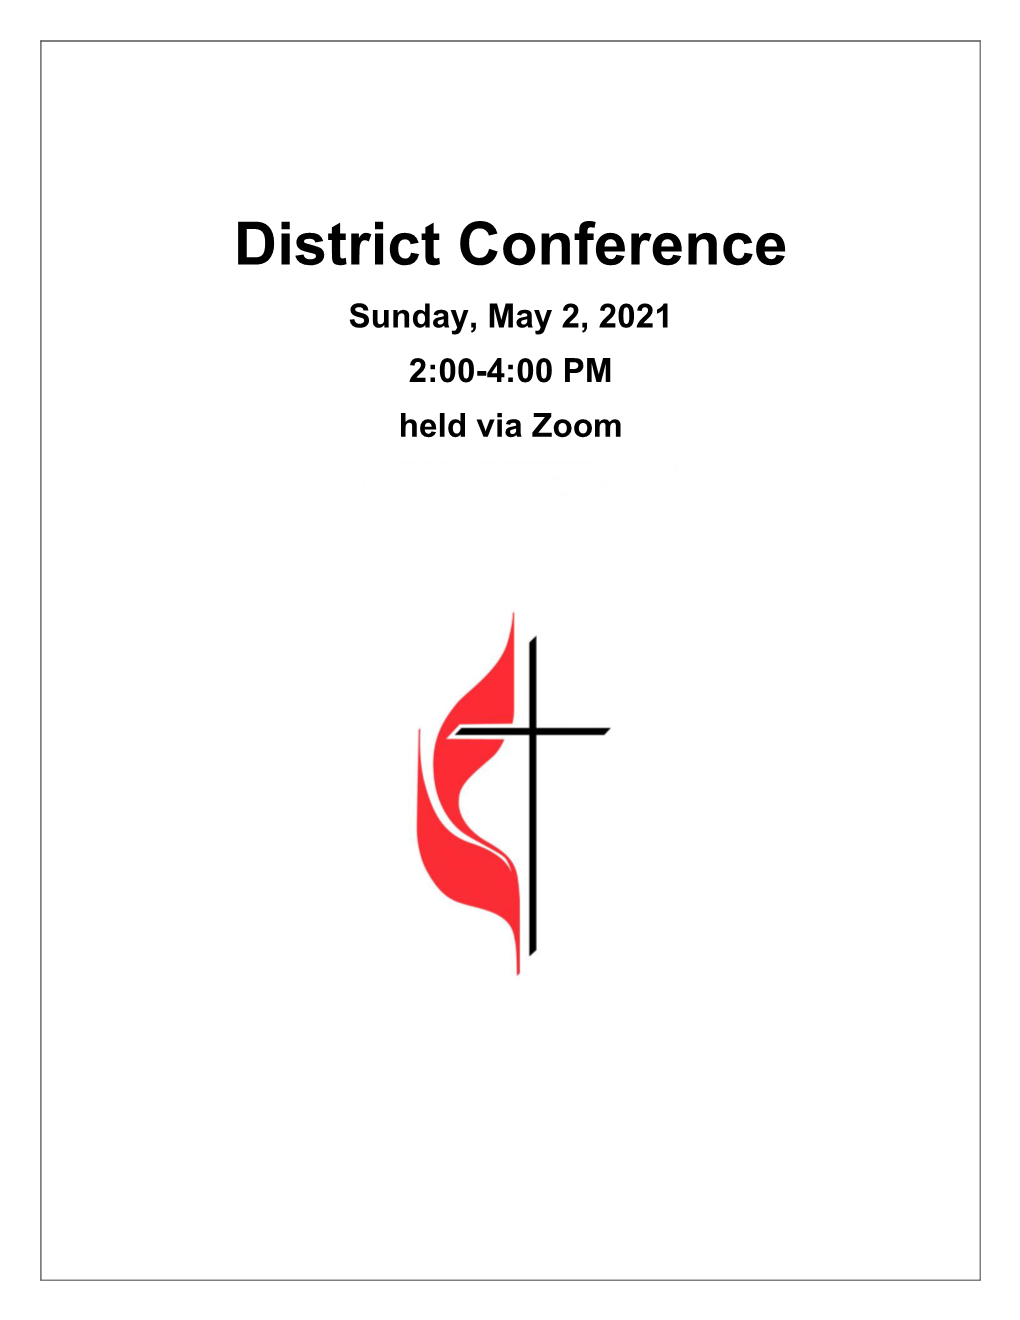 District Conference Sunday, May 2, 2021 2:00-4:00 PM Held Via Zoom District Conference May 2, 2021 - 2:00 PM a ZOOM Gathering Hosted by First UMC, Cedar Falls, Iowa